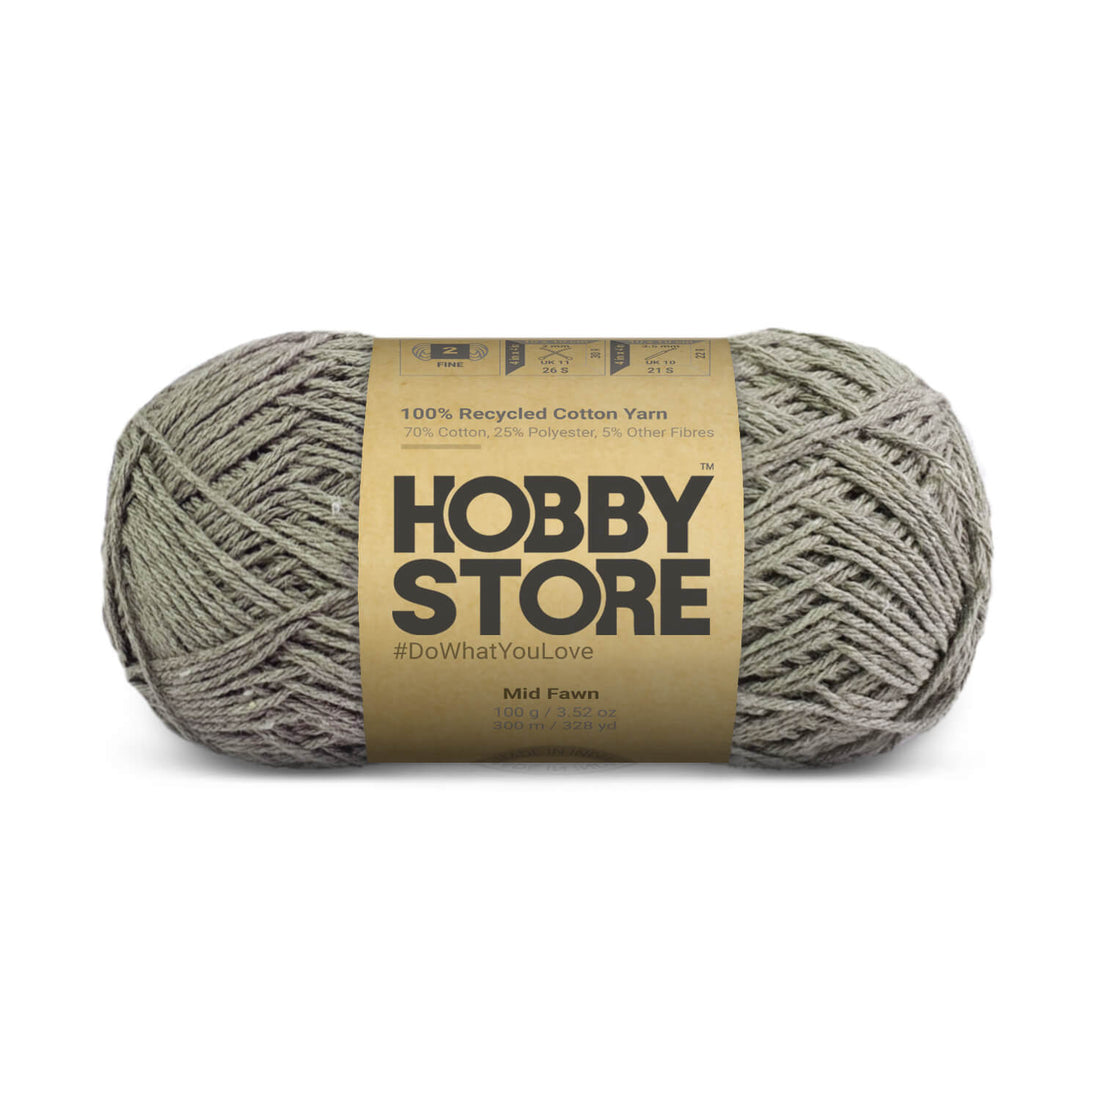 Recycled Cotton Yarn by Hobby Store - Mid Fawn 8314